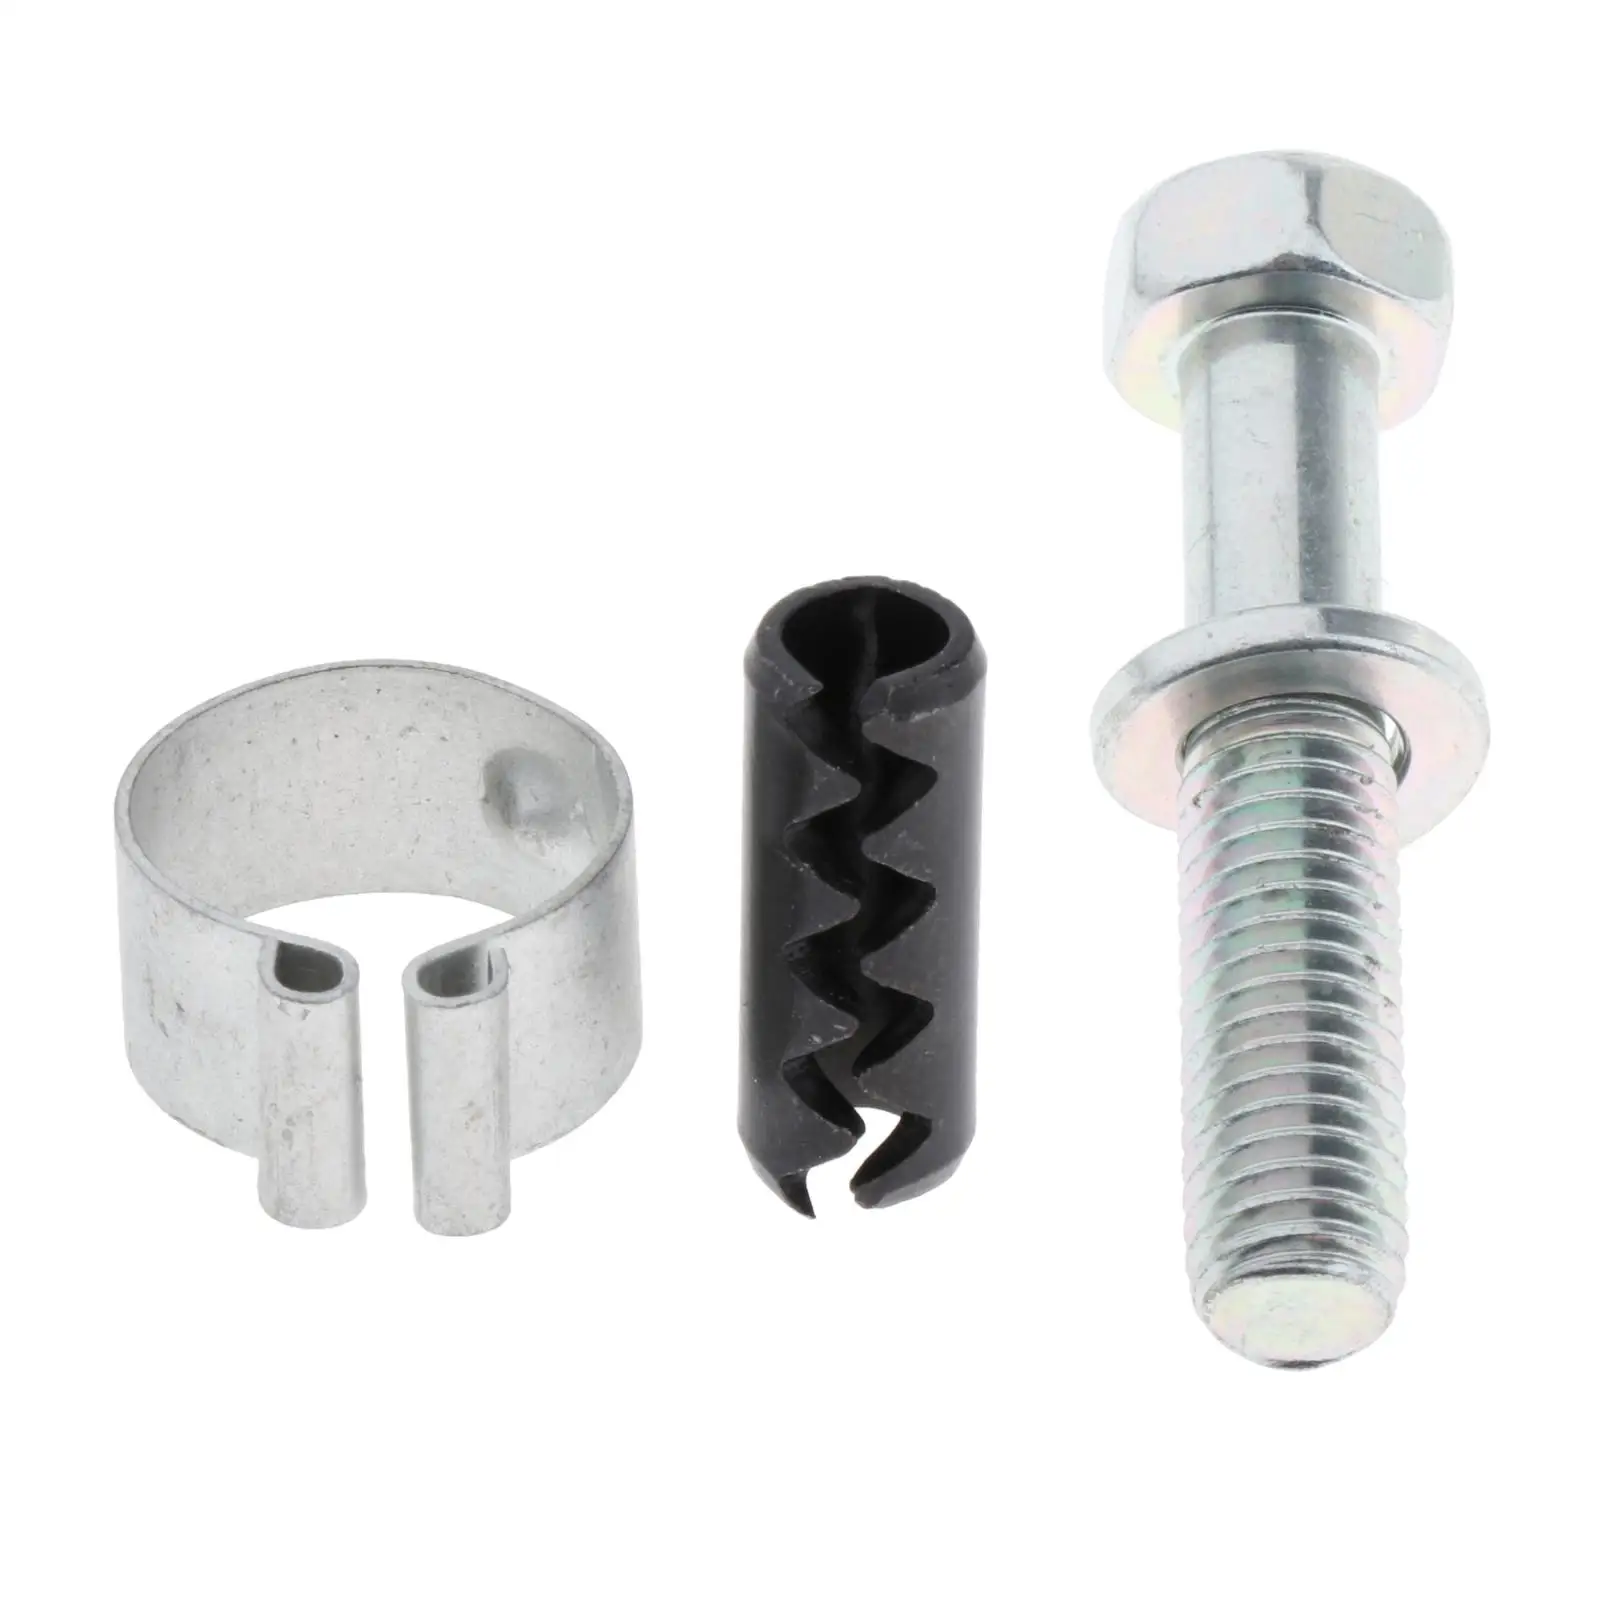 Replacement Durable Shift Linkage Pin C-Clip Kit for Honda Civic D-Series with 5-Speed Manual Transmission 1988 - 2000